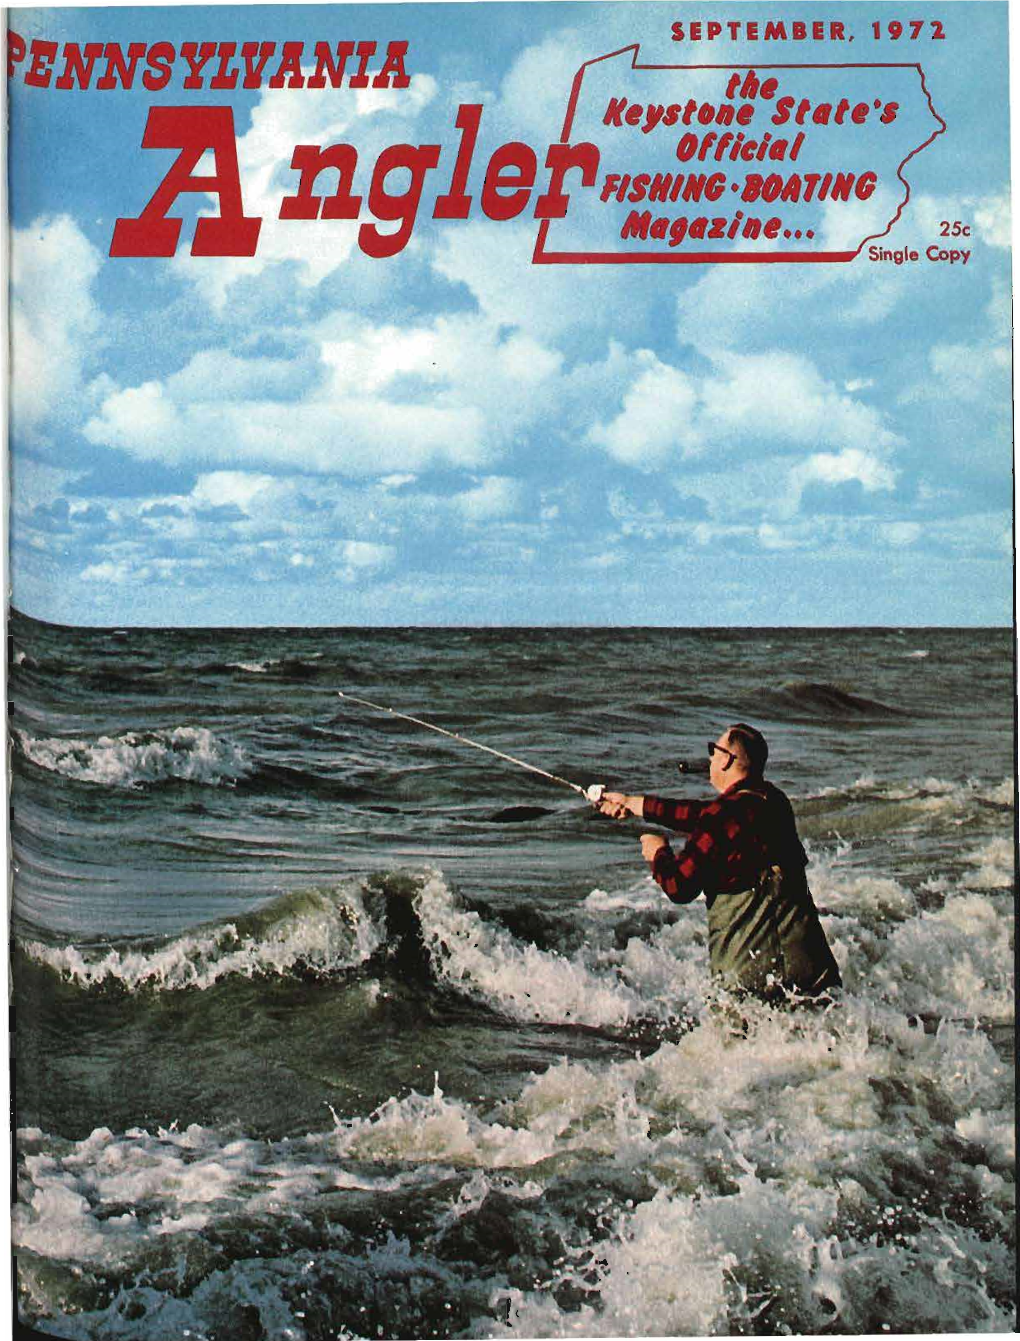 Lake Erie, and This Issue of the ANGLER Begins a Series on the Lake and Helps to Unravel the Confus­ Ing Stories That Have Been Told About the Lake